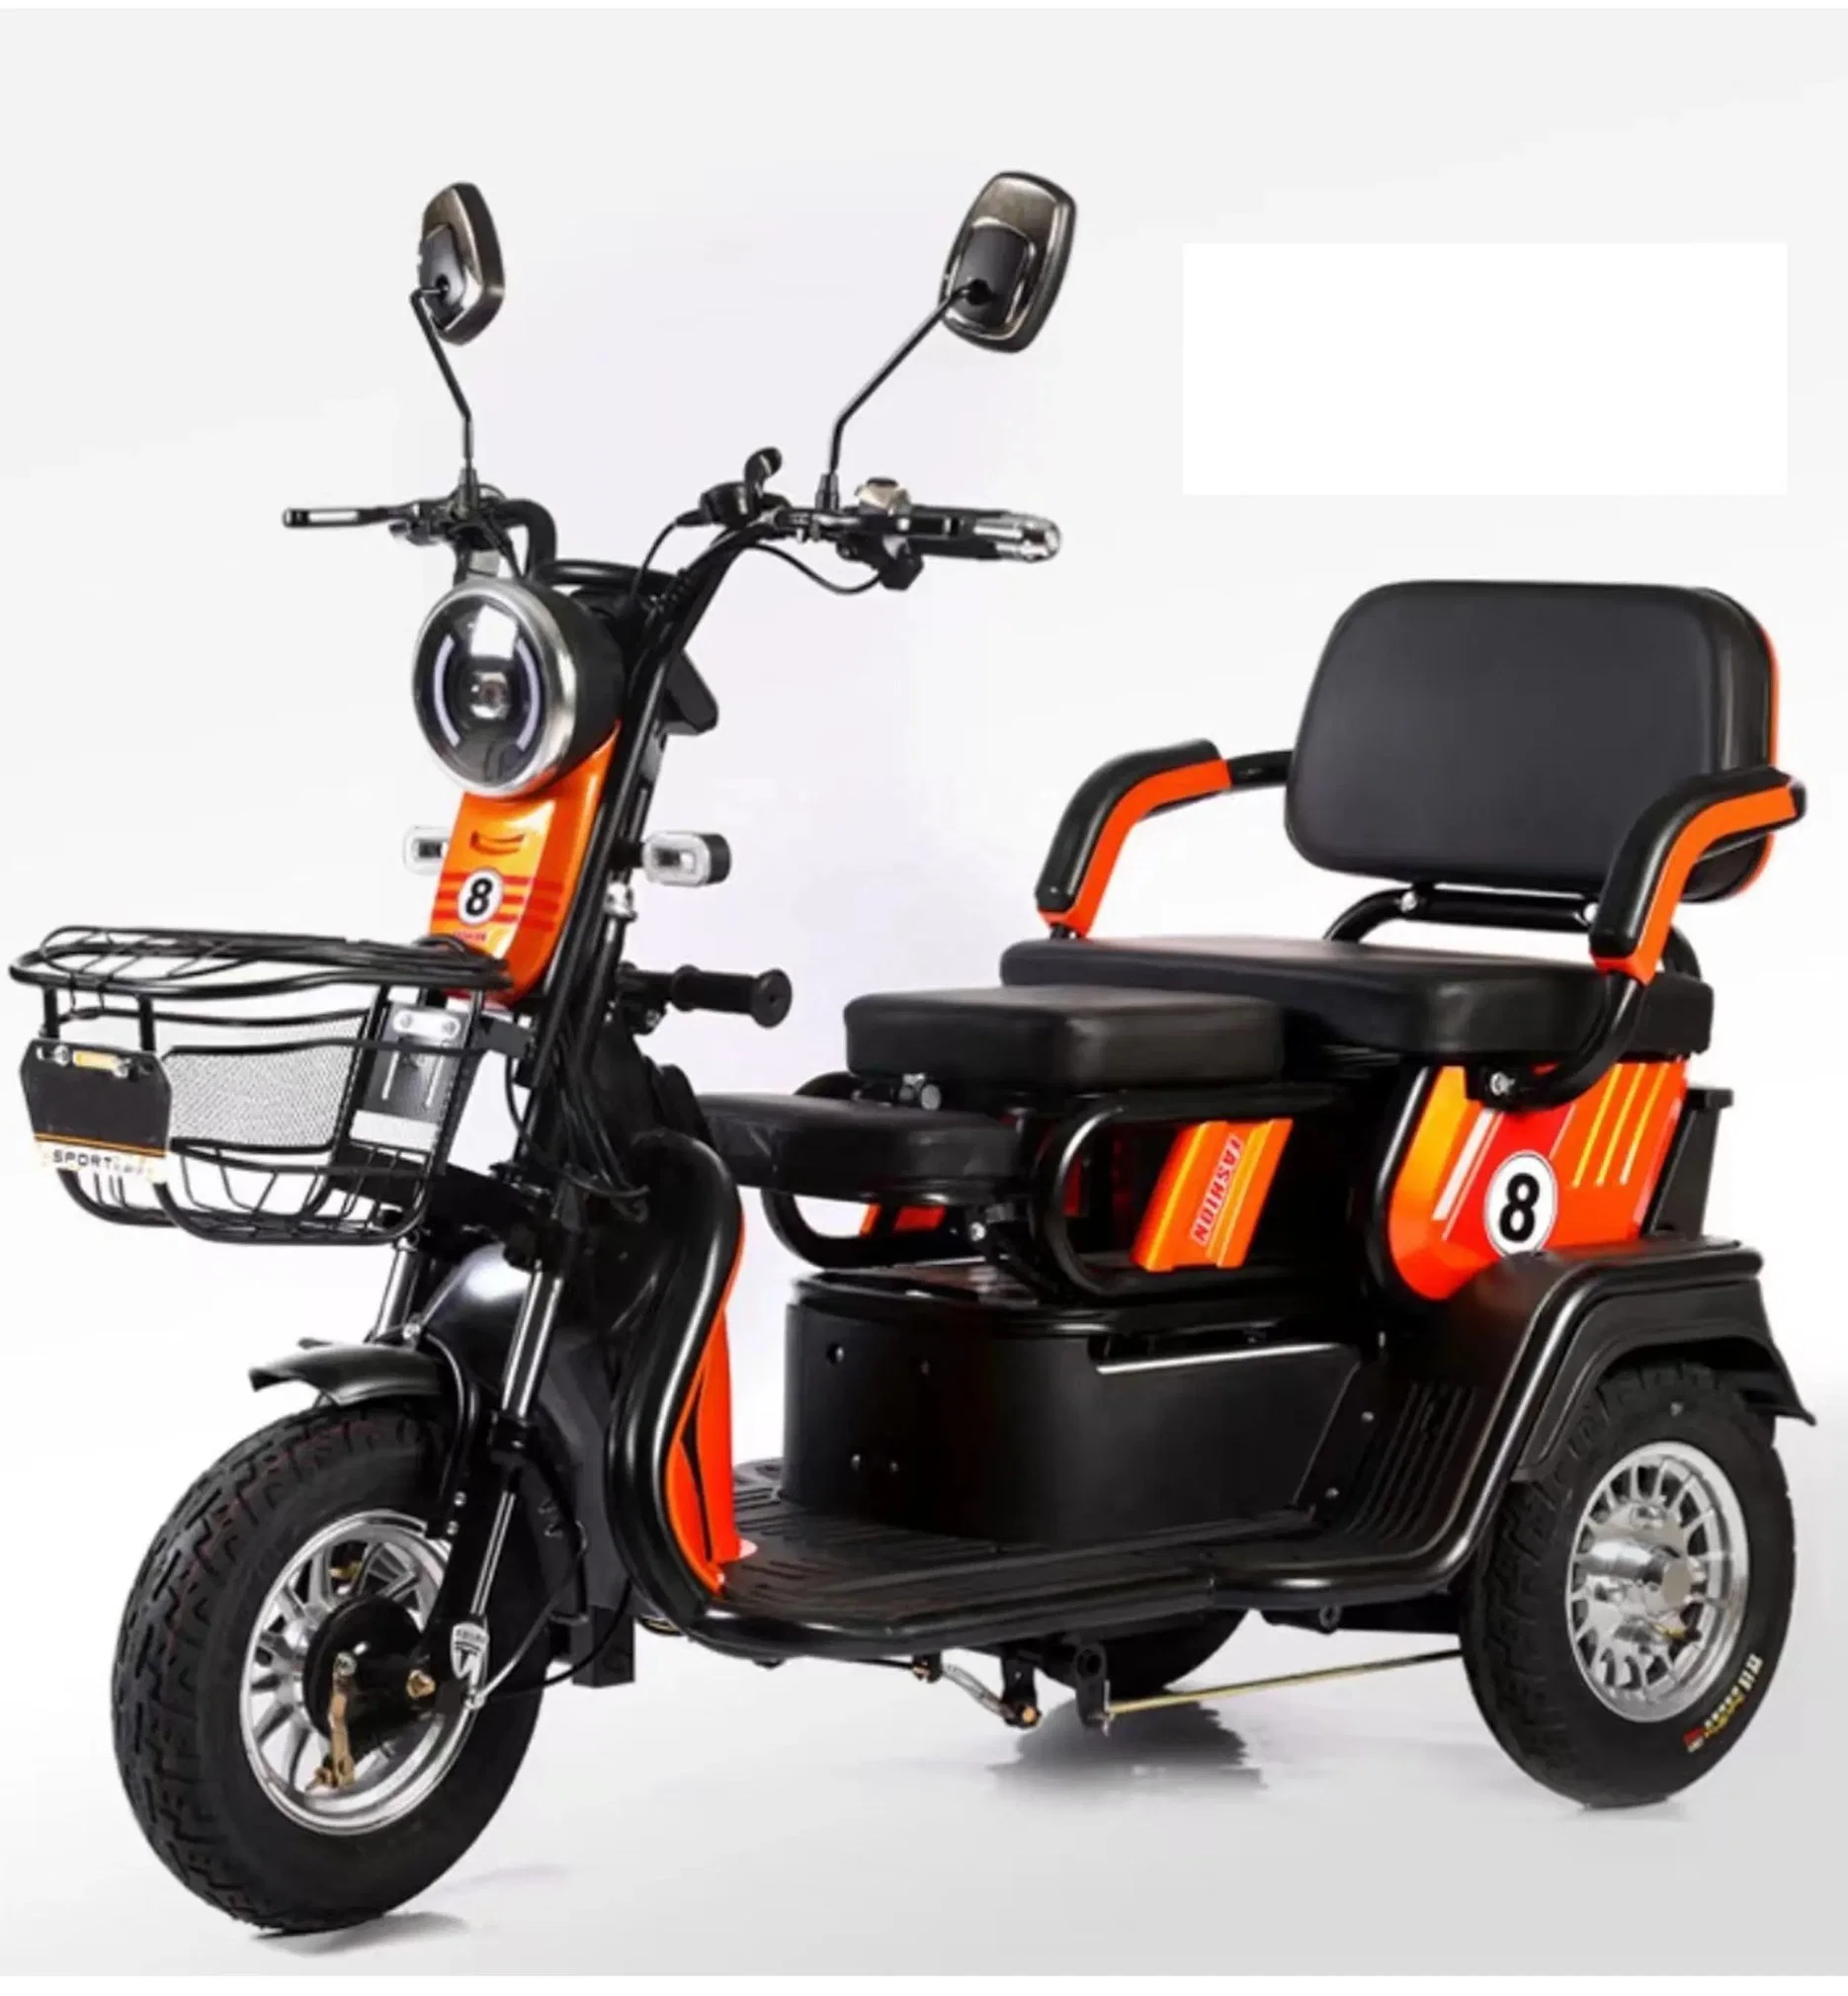 OEM 48V 60V Tricycle Electric Bike Adult Powerful 3 Wheel Tricycle 2 Seat Mobility Scooter Electric 3 Wheels Open Passenger 7-9h